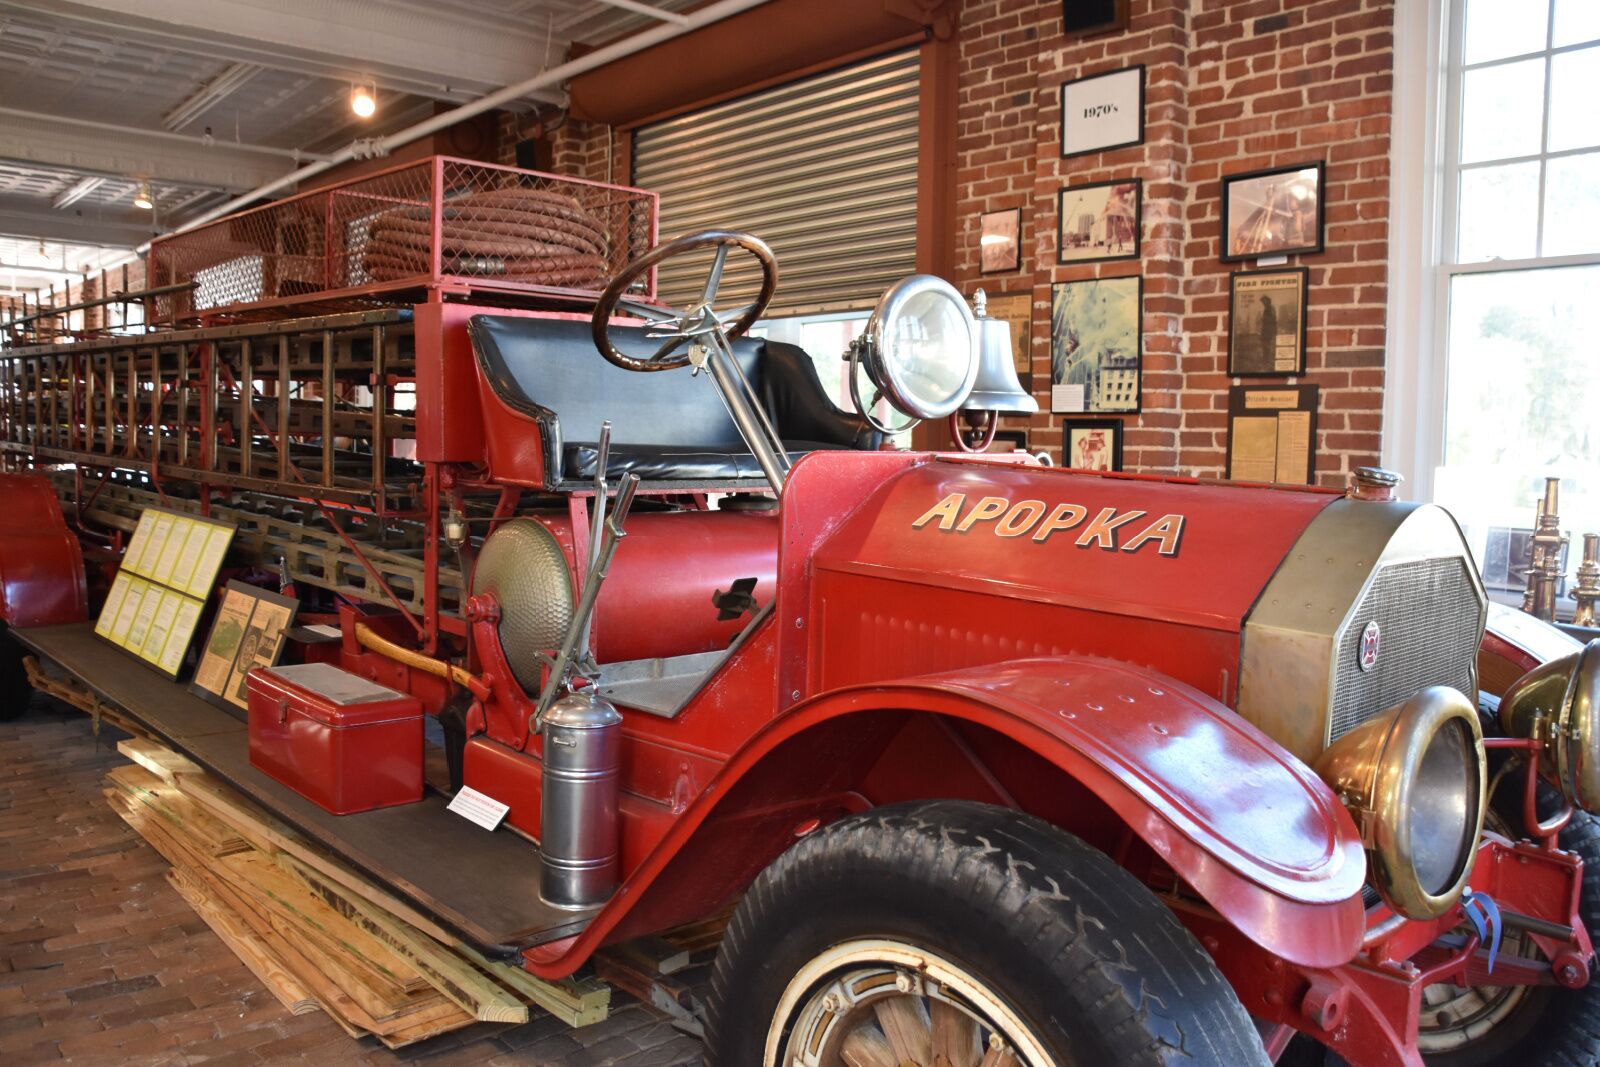 museums in orlando - fire truck